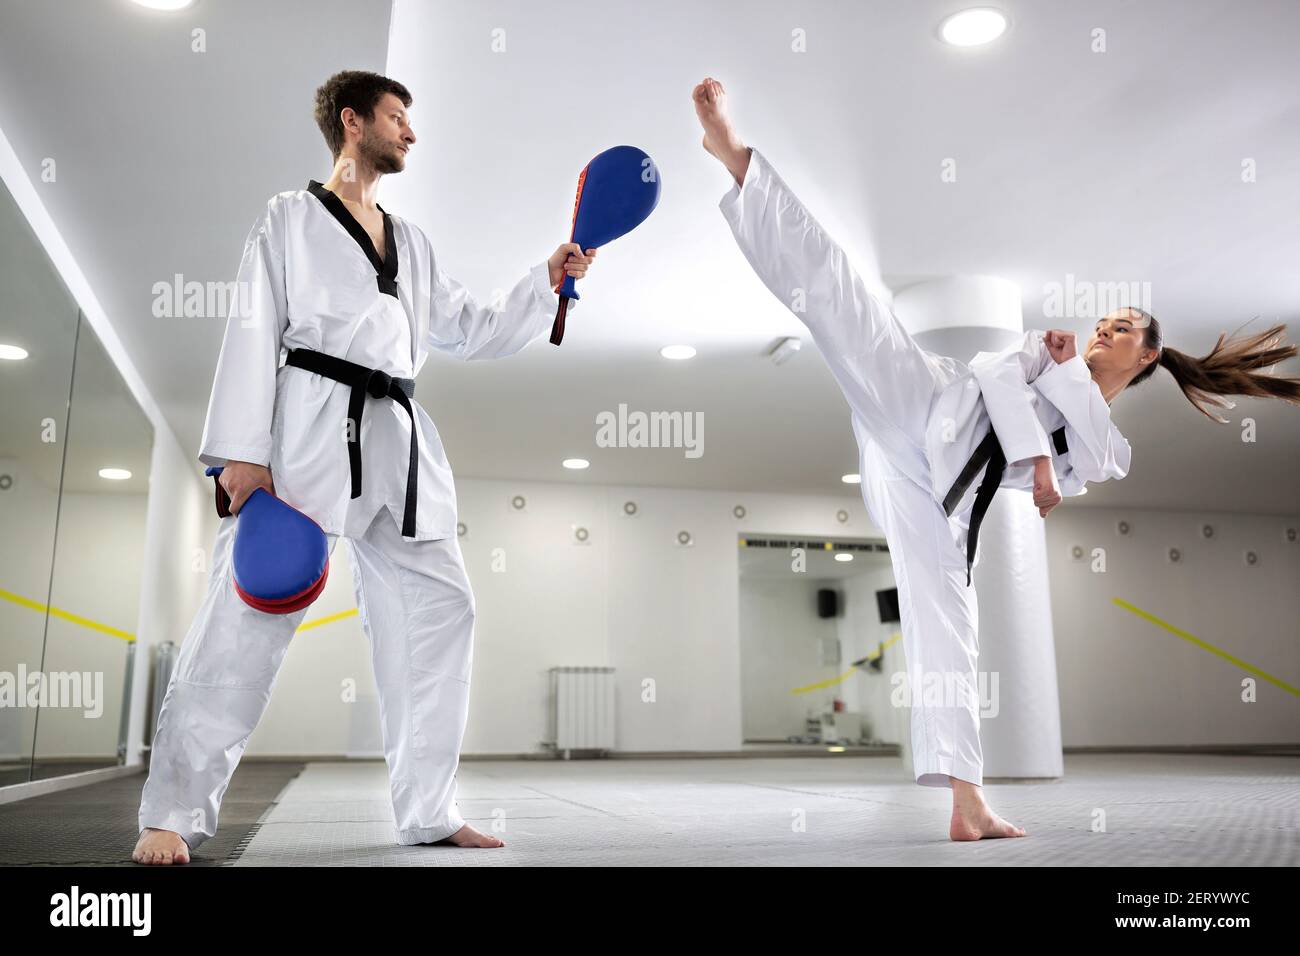 Kick pad target exercise in martial art combat training, young woman  training Stock Photo - Alamy